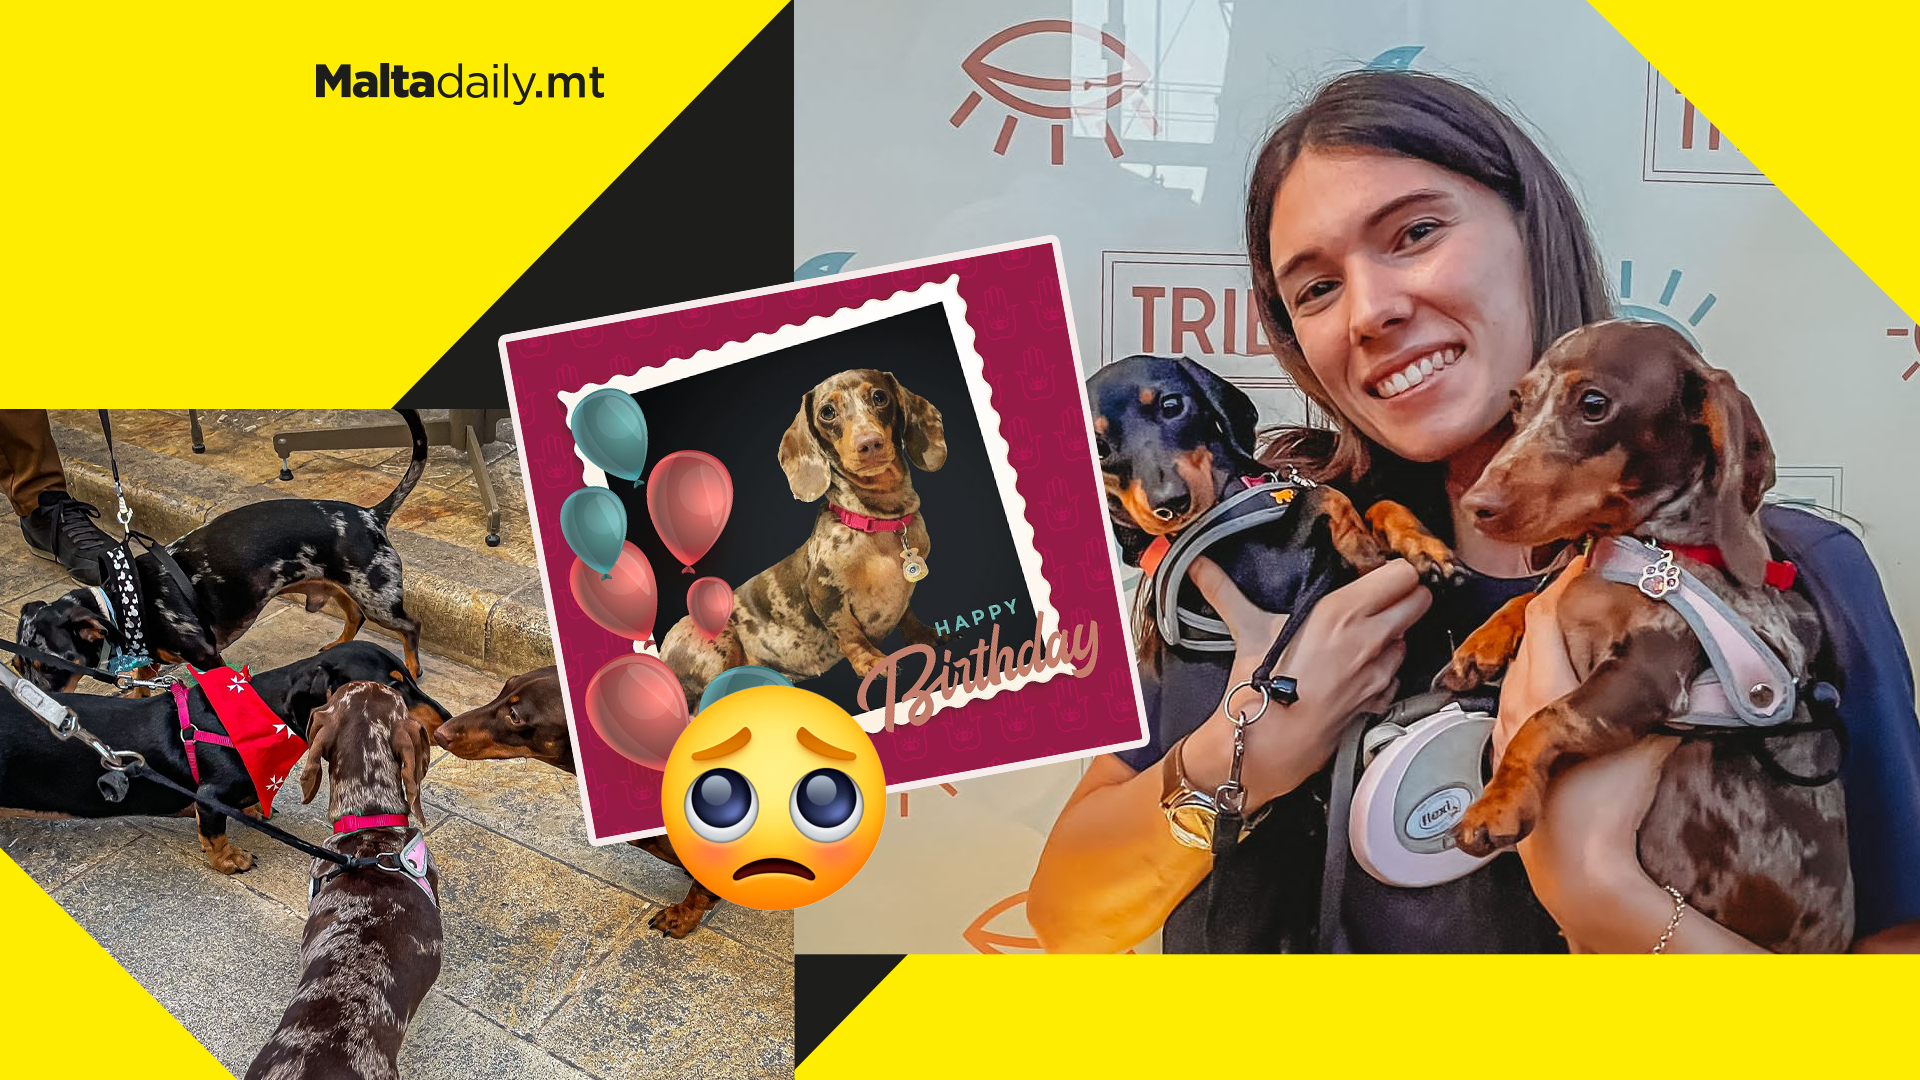 Sausage Dog Party brings dachshunds and owners to Tribe Malta